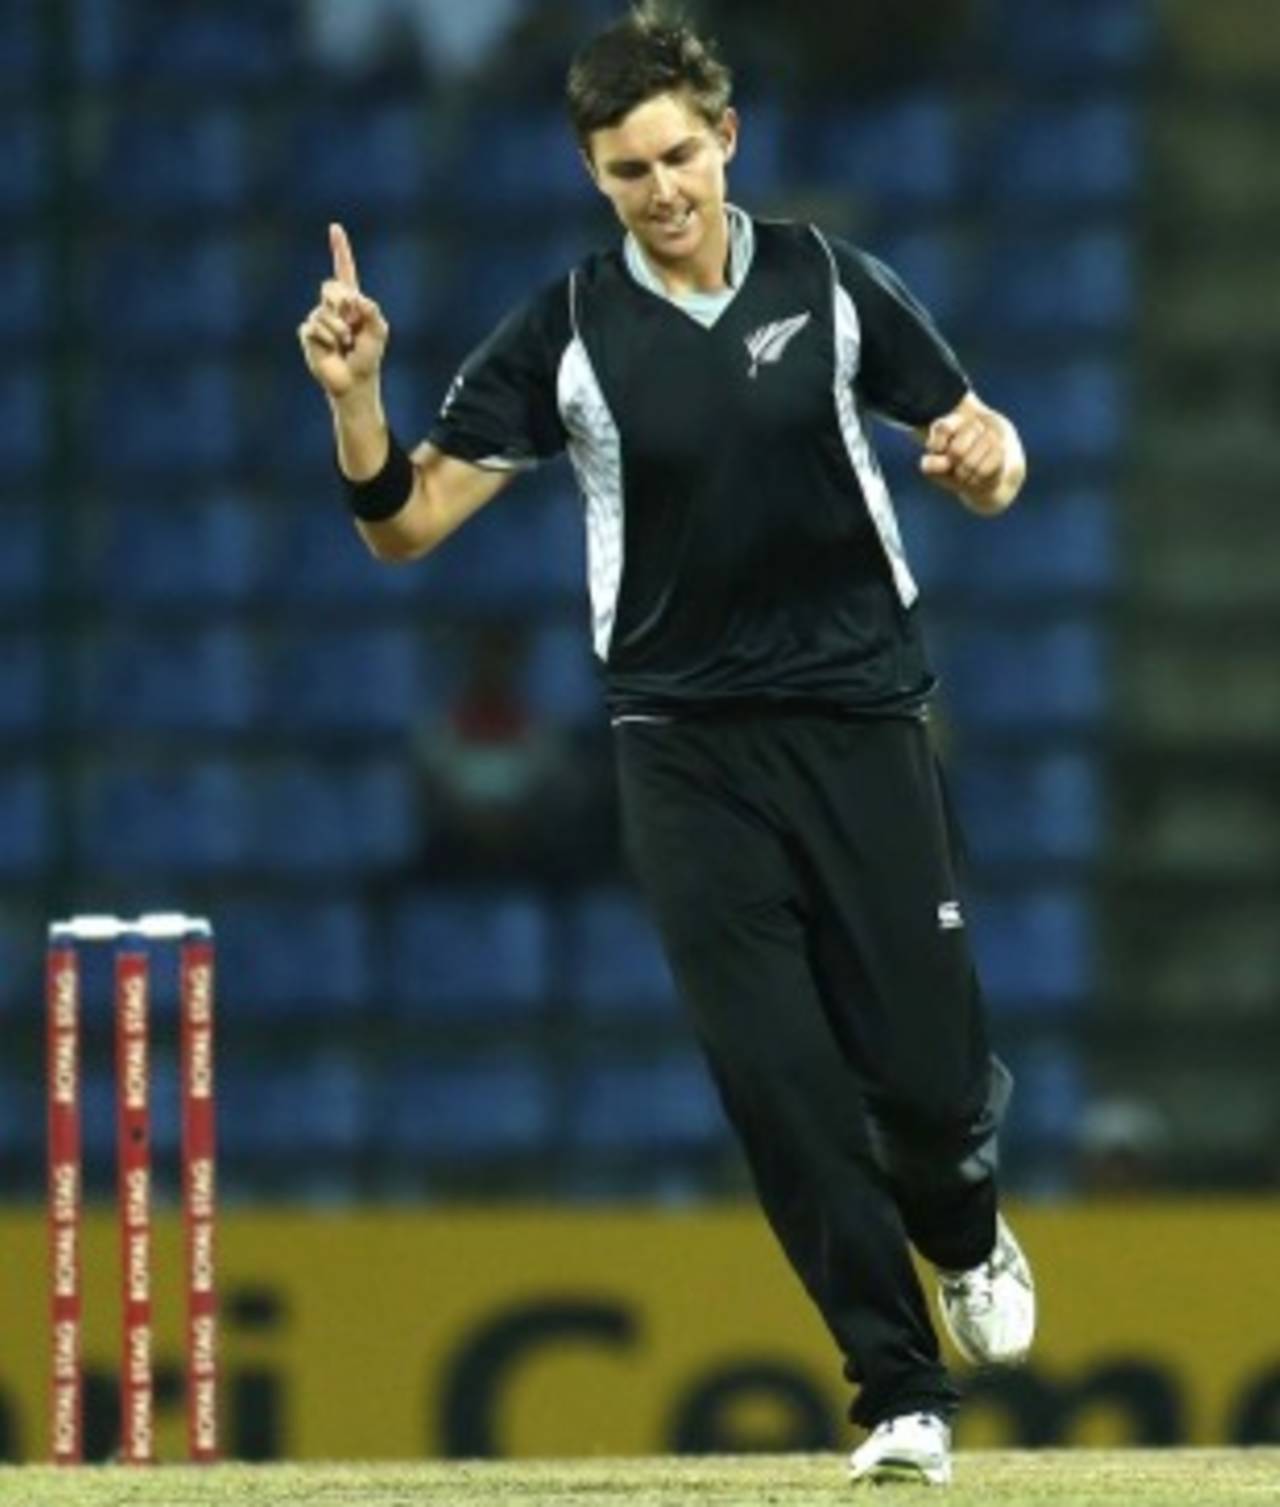 New Zealand will depend on their young bowling attack to turn their fortunes around in a tough tour&nbsp;&nbsp;&bull;&nbsp;&nbsp;Associated Press